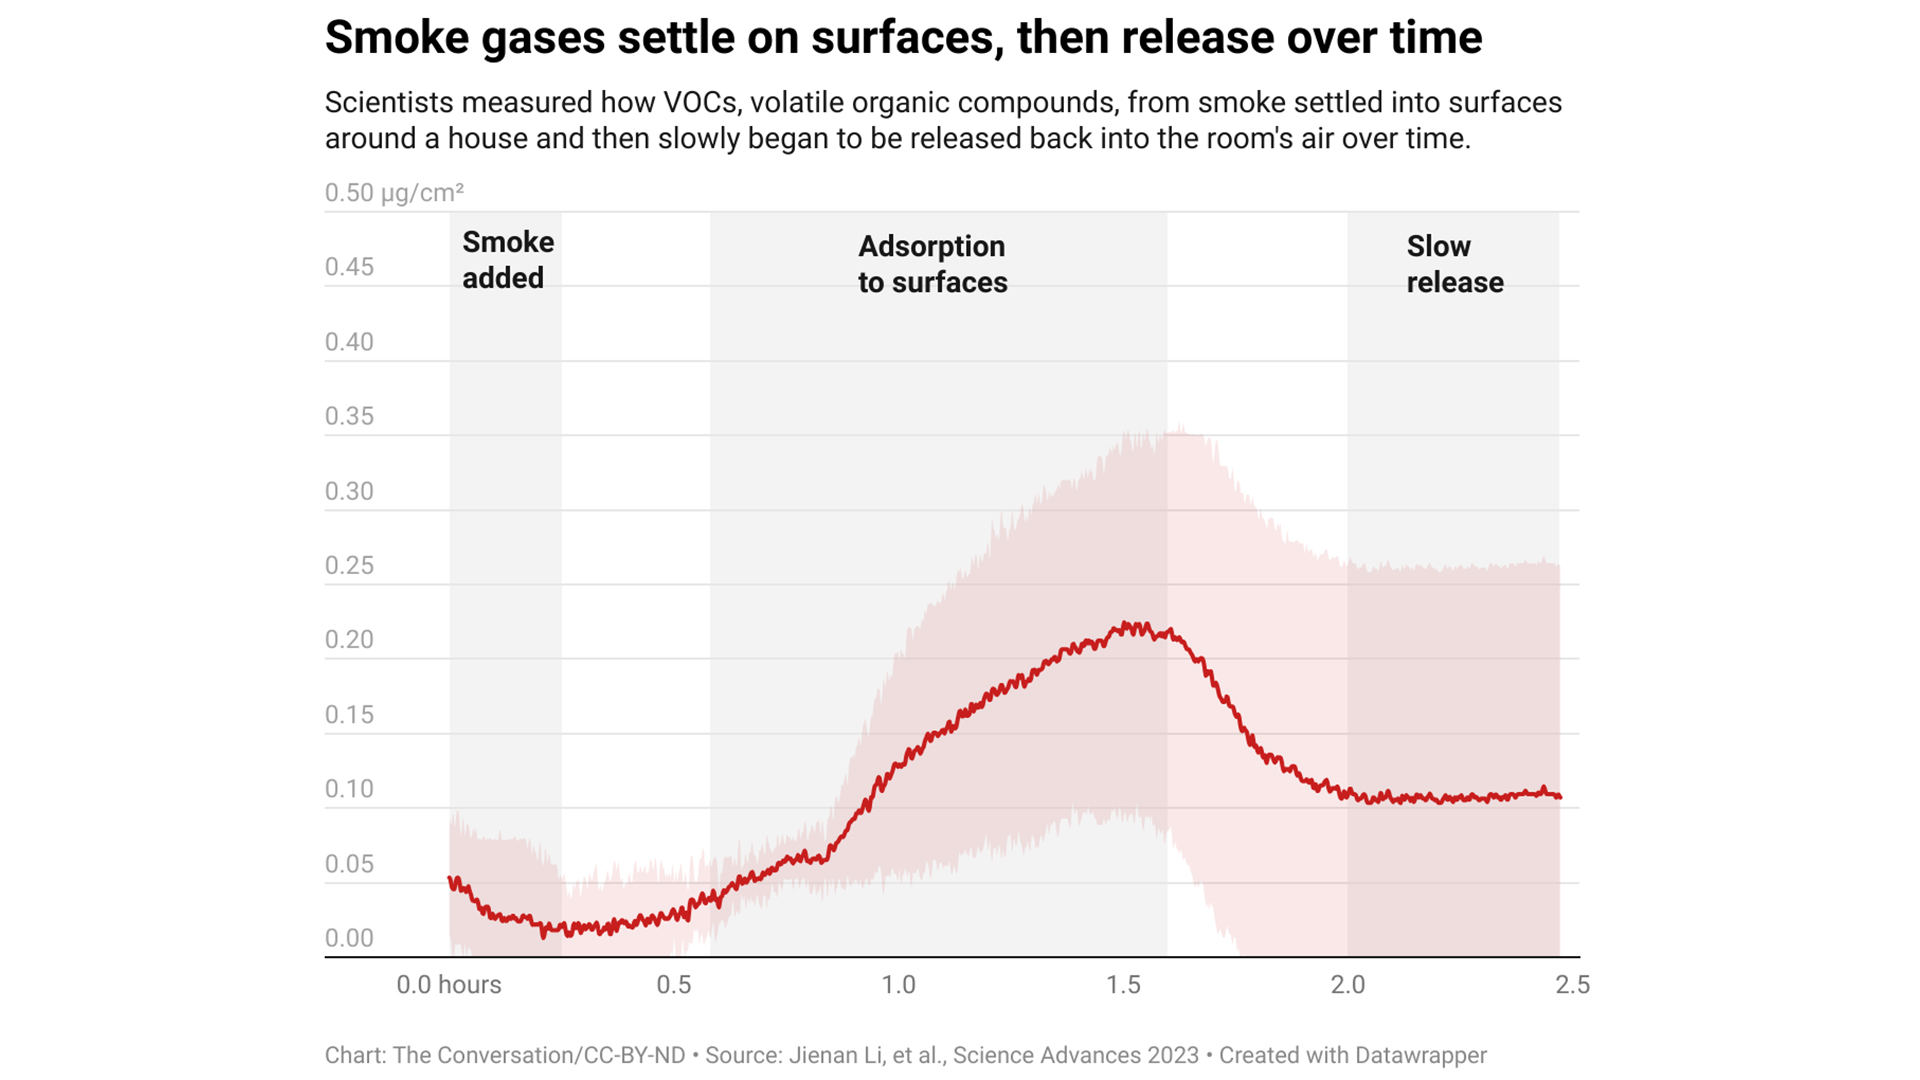 chart shows how gases from wildfire smoke are absorbed by surfaces in a home and then steadily release over the course of hours